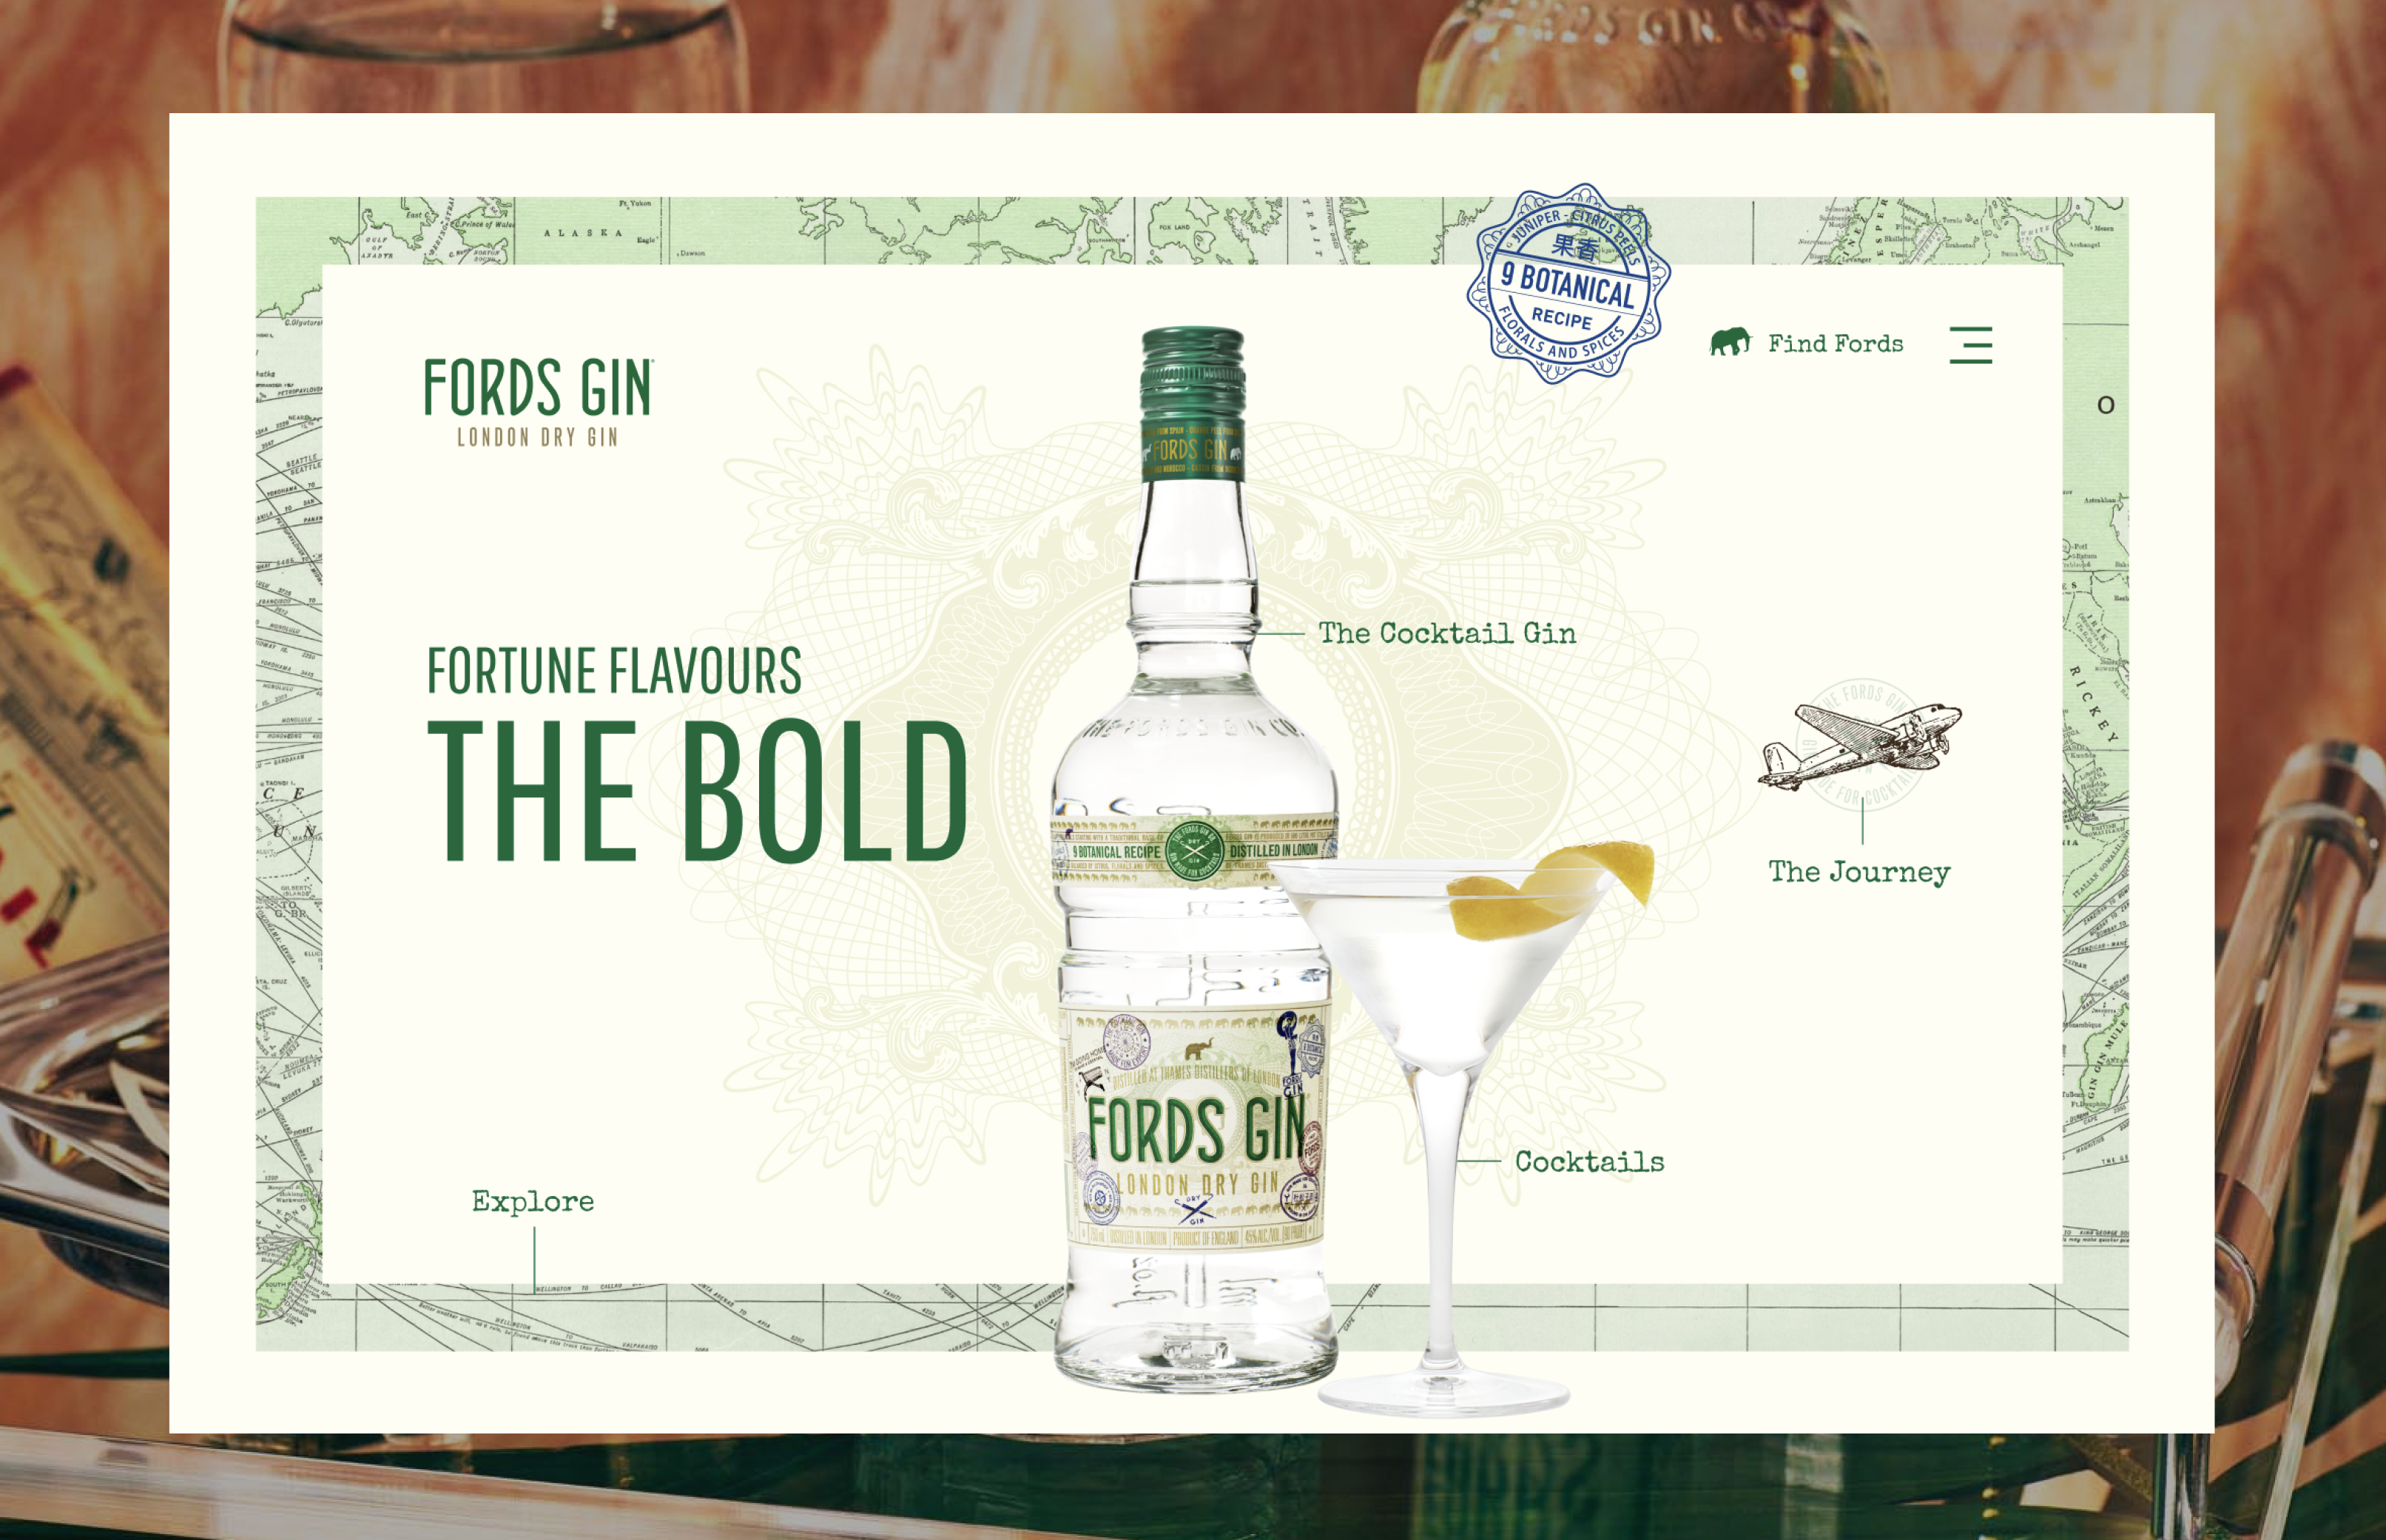 Fords Gin web design featuring the Fords Gin bottle with a martini glass sitting next to it.